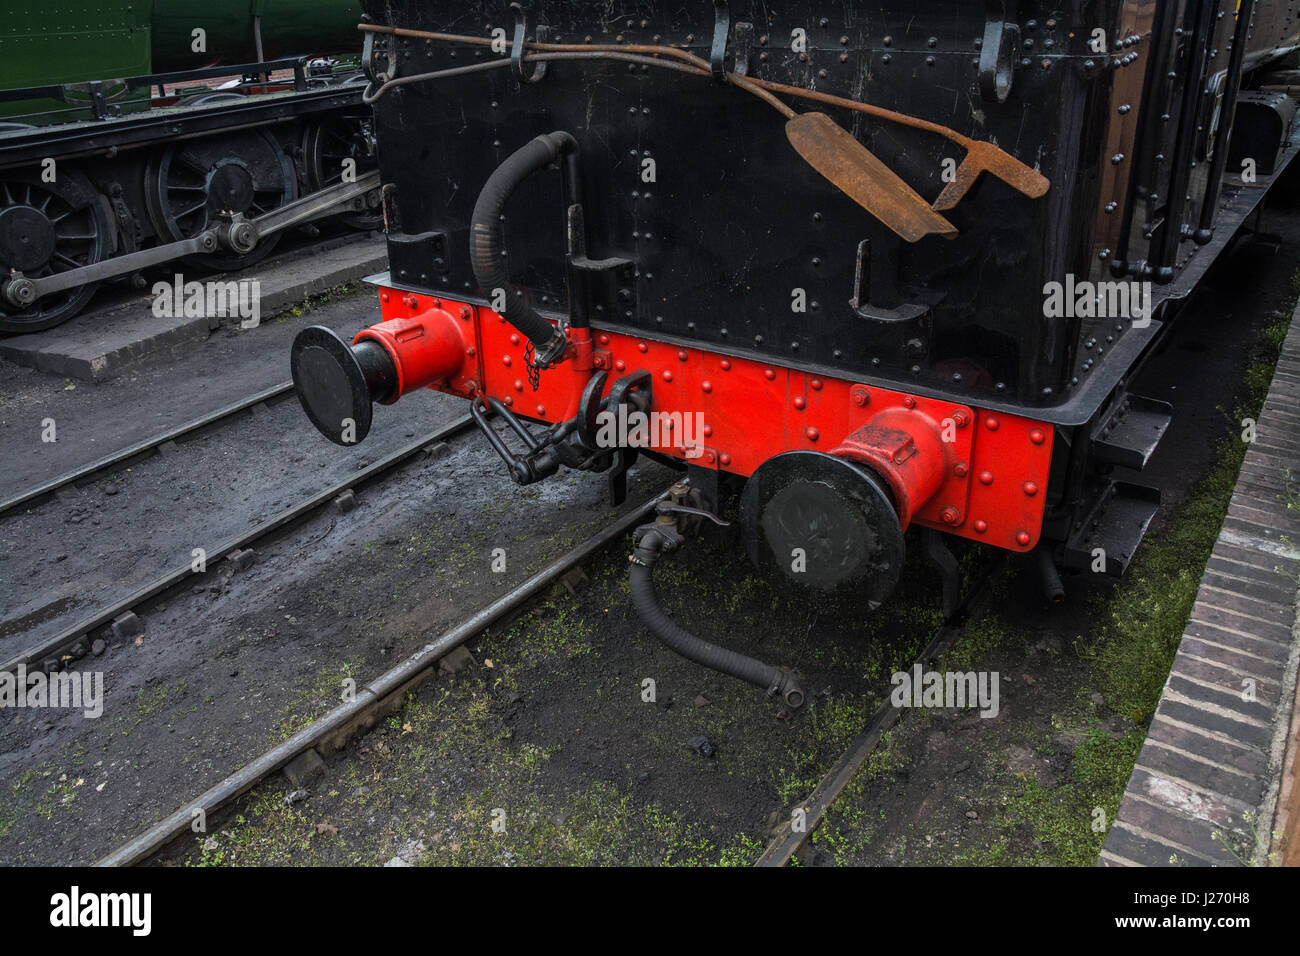 Buffer and buffers on an old fashioned steam train. Bridgnorth, Shropshire, West Midlands, UK Stock Photo